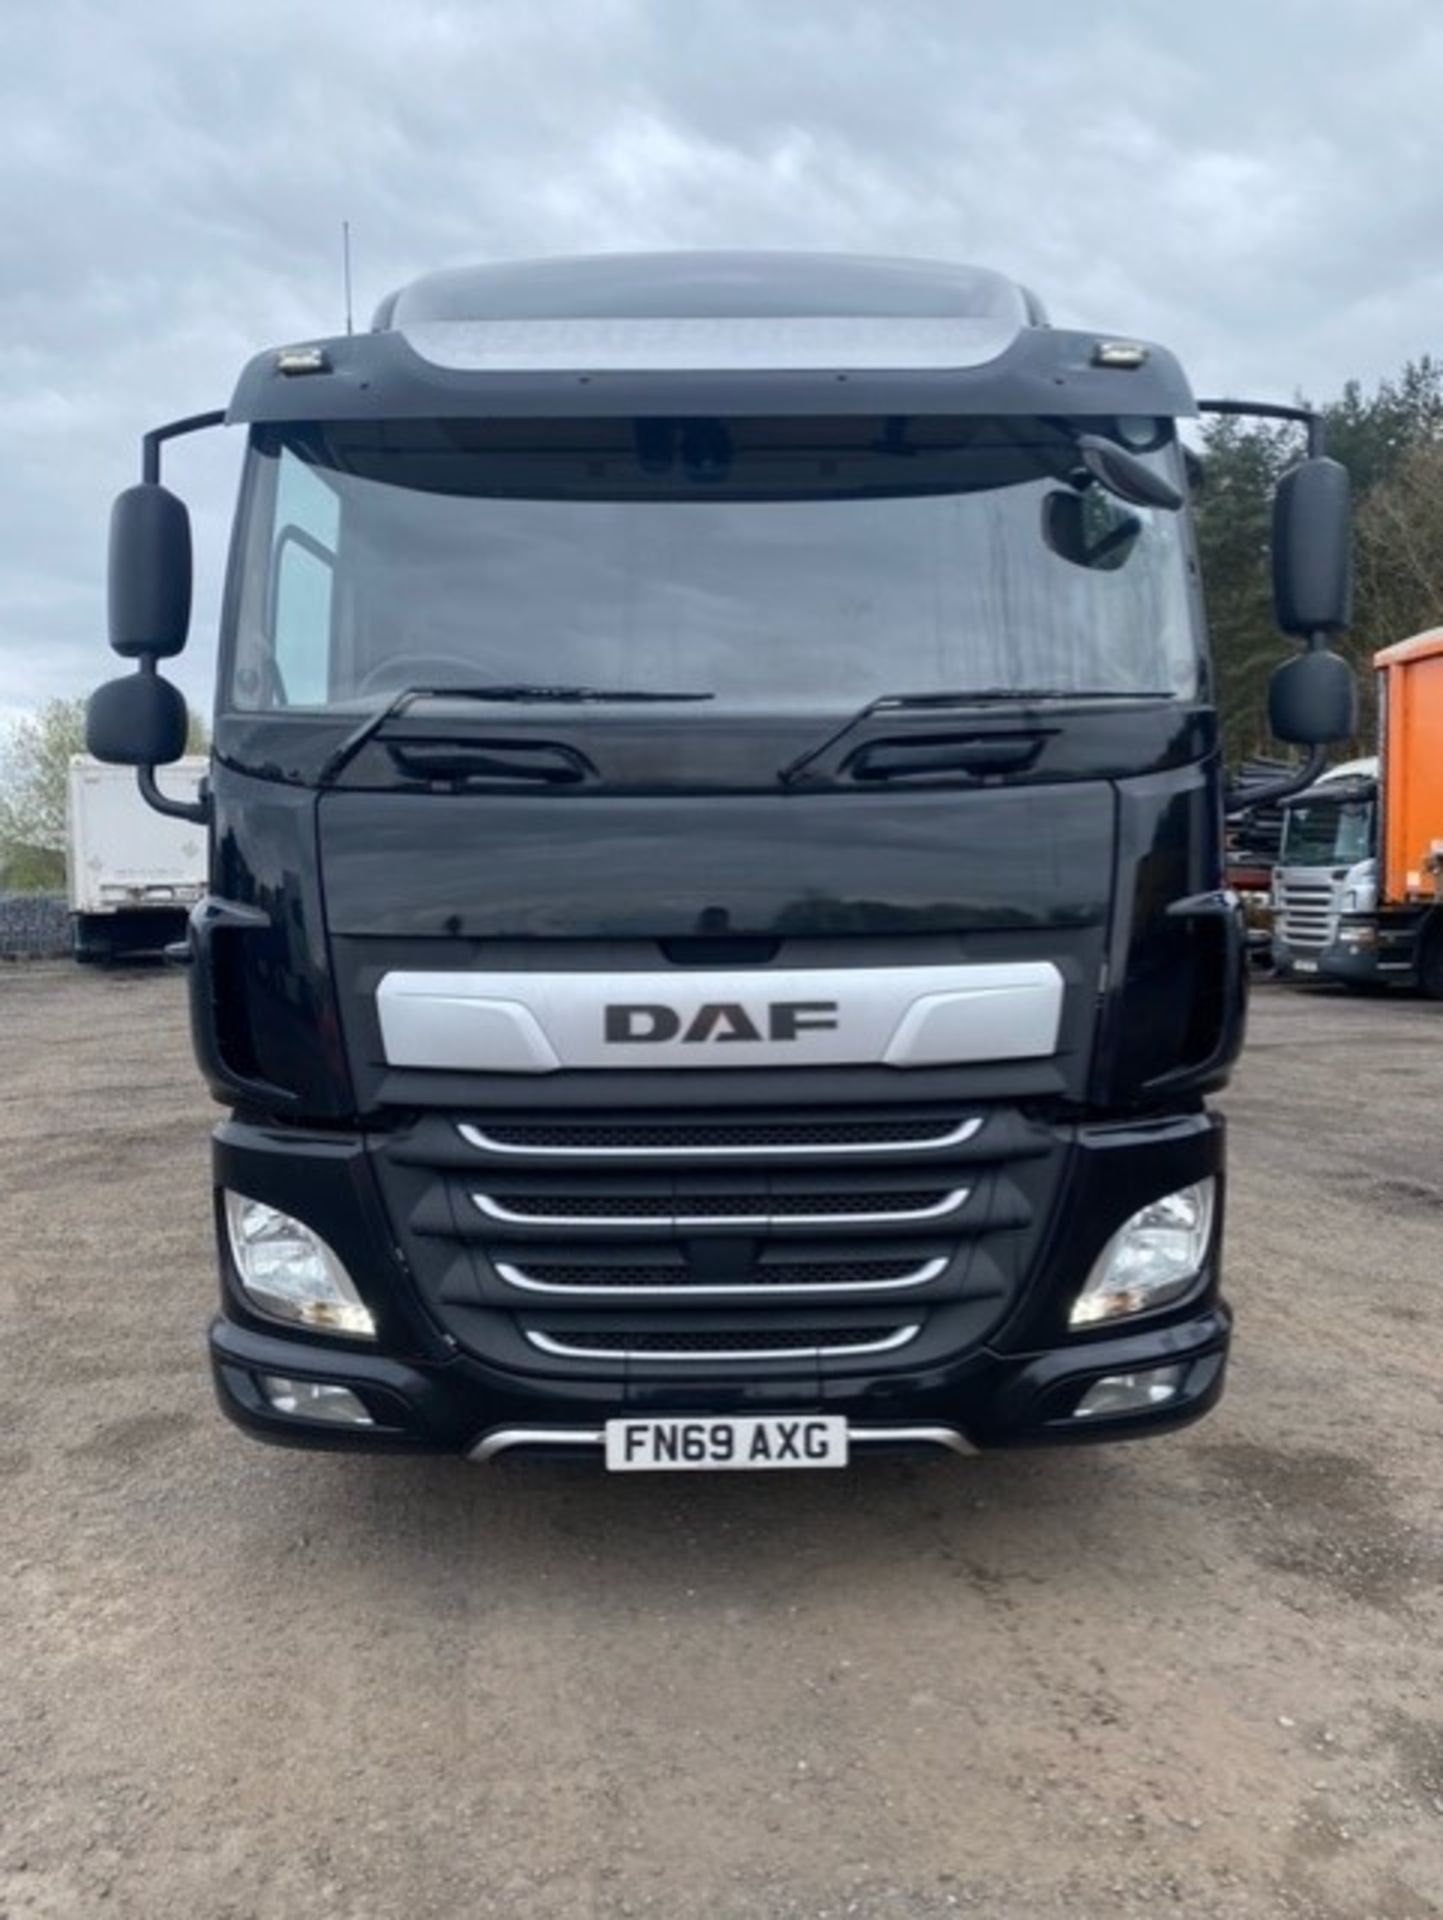 2019, DAF CF 260 - FN69 AXG (18 Ton Rigid Truck with Tail Lift) - Image 13 of 16